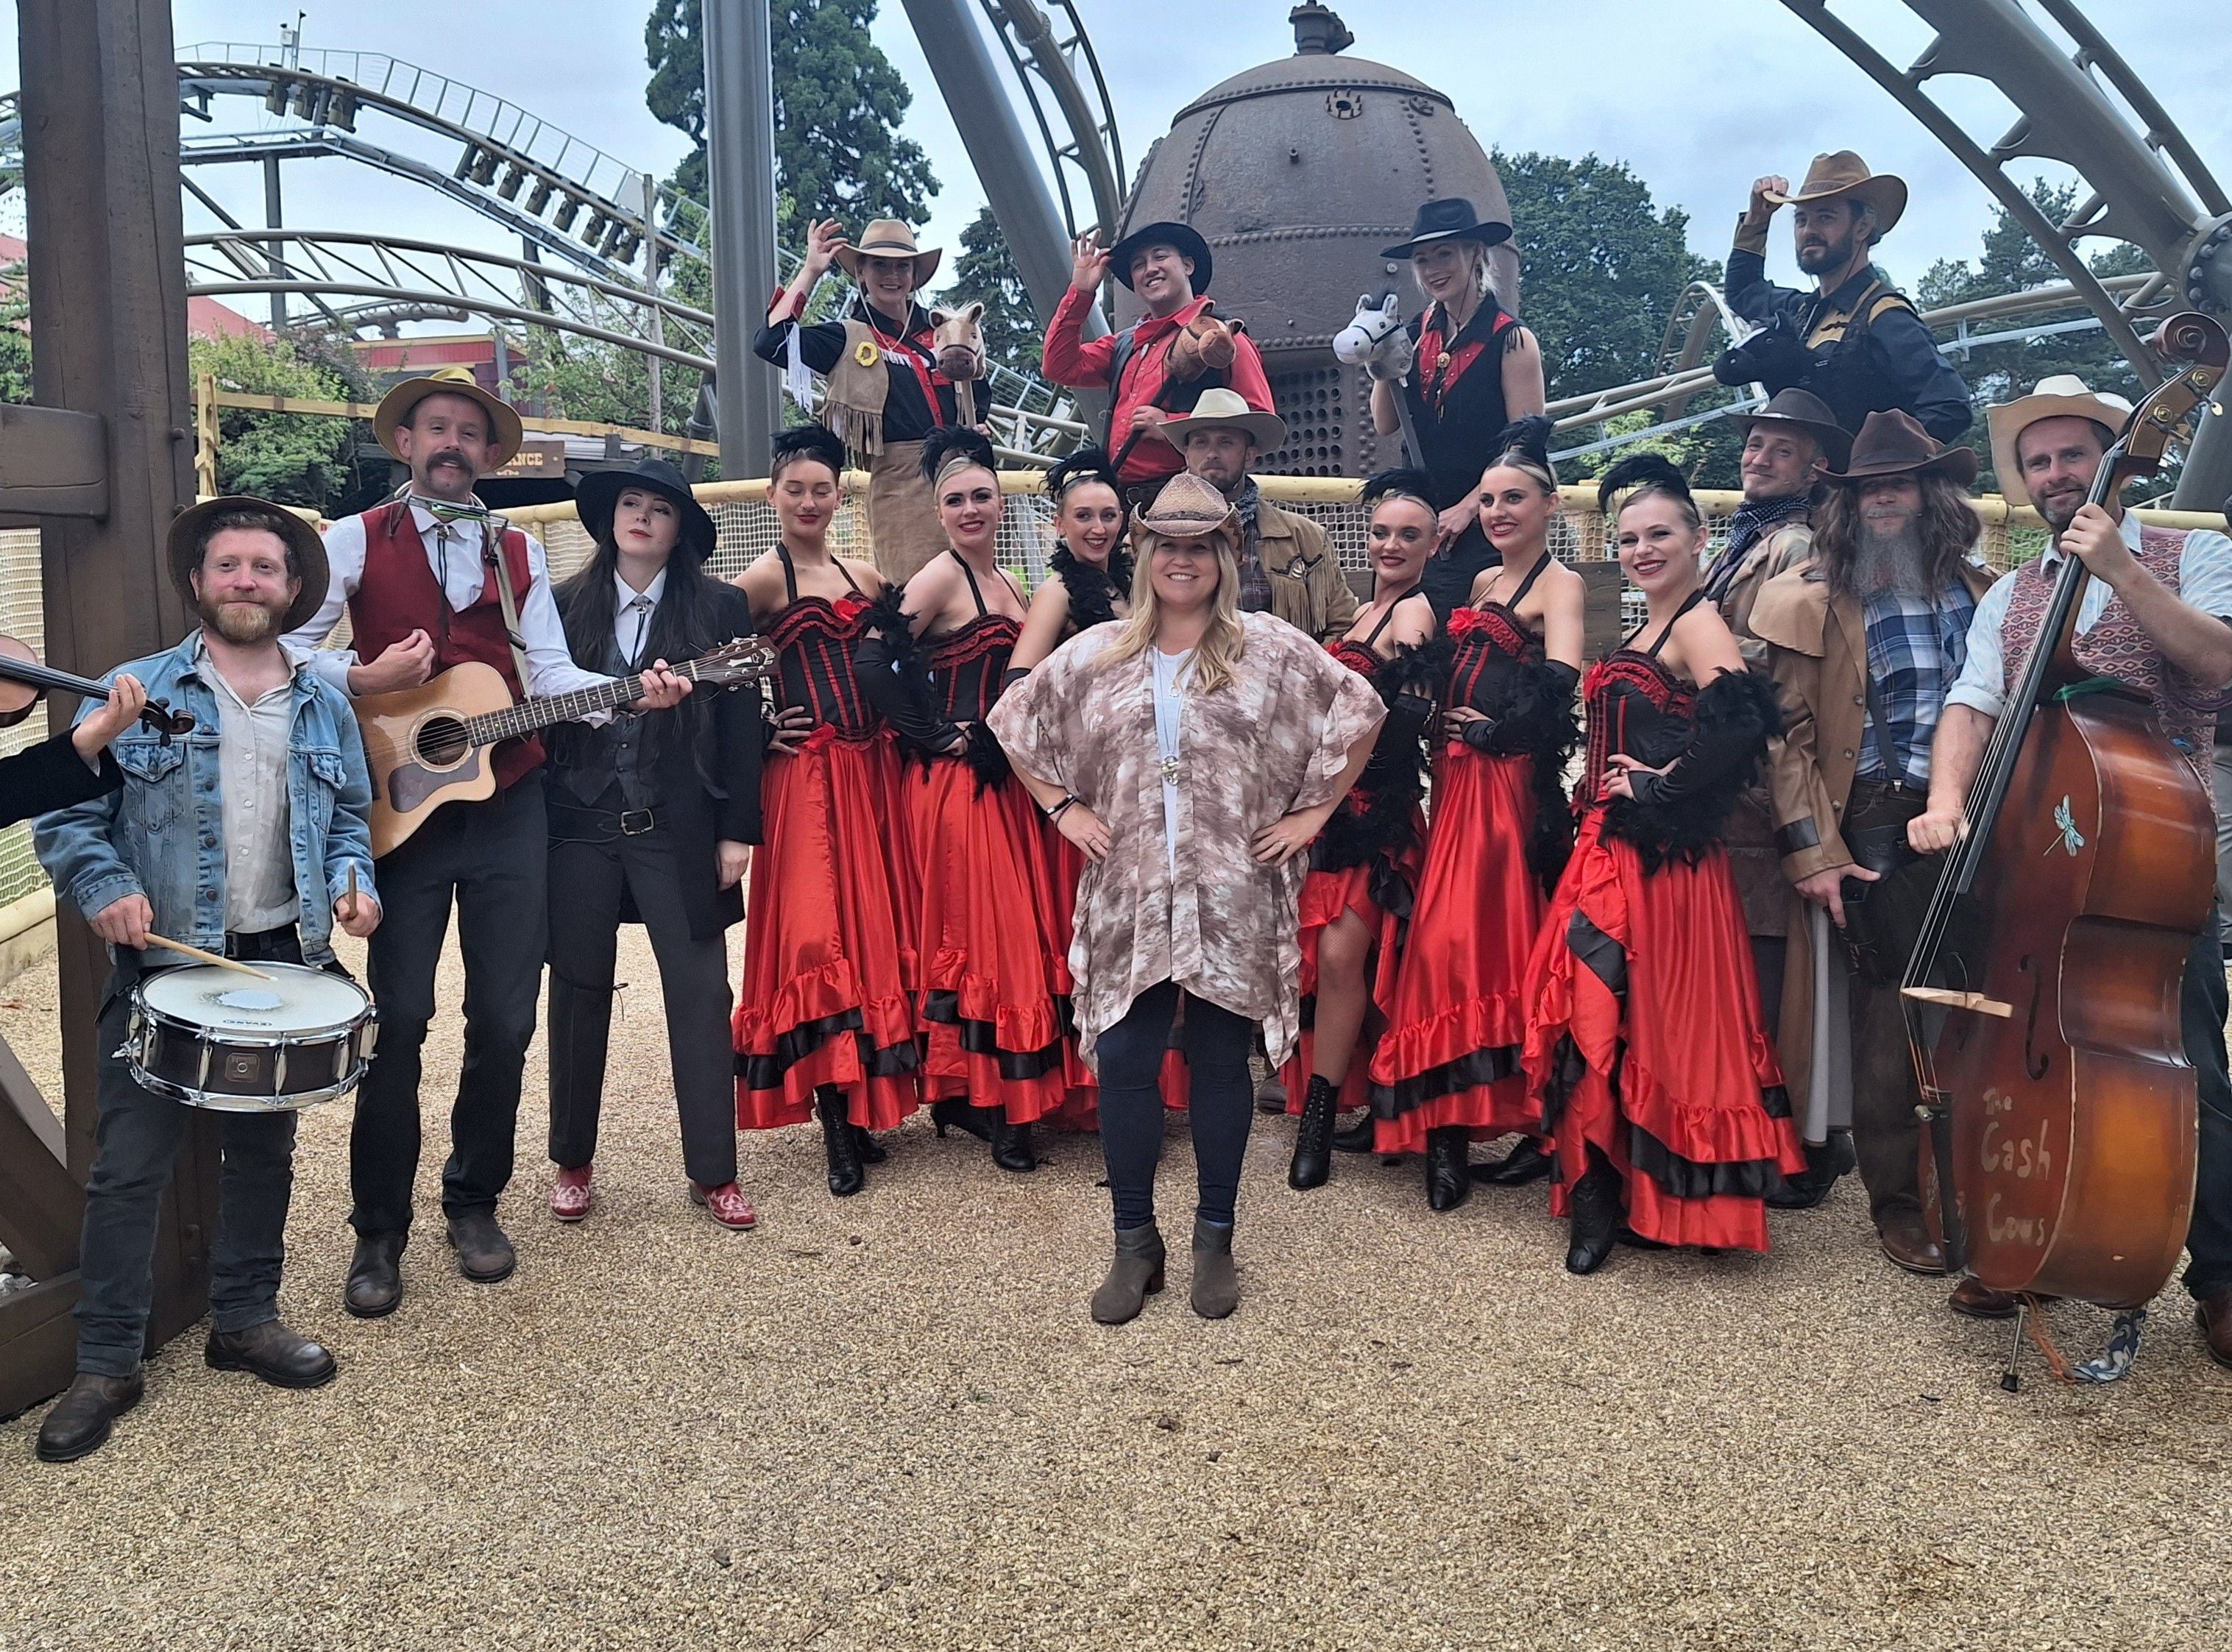 Drayton Manor's mission to 'make Britain smile' as Gold Rush opens 